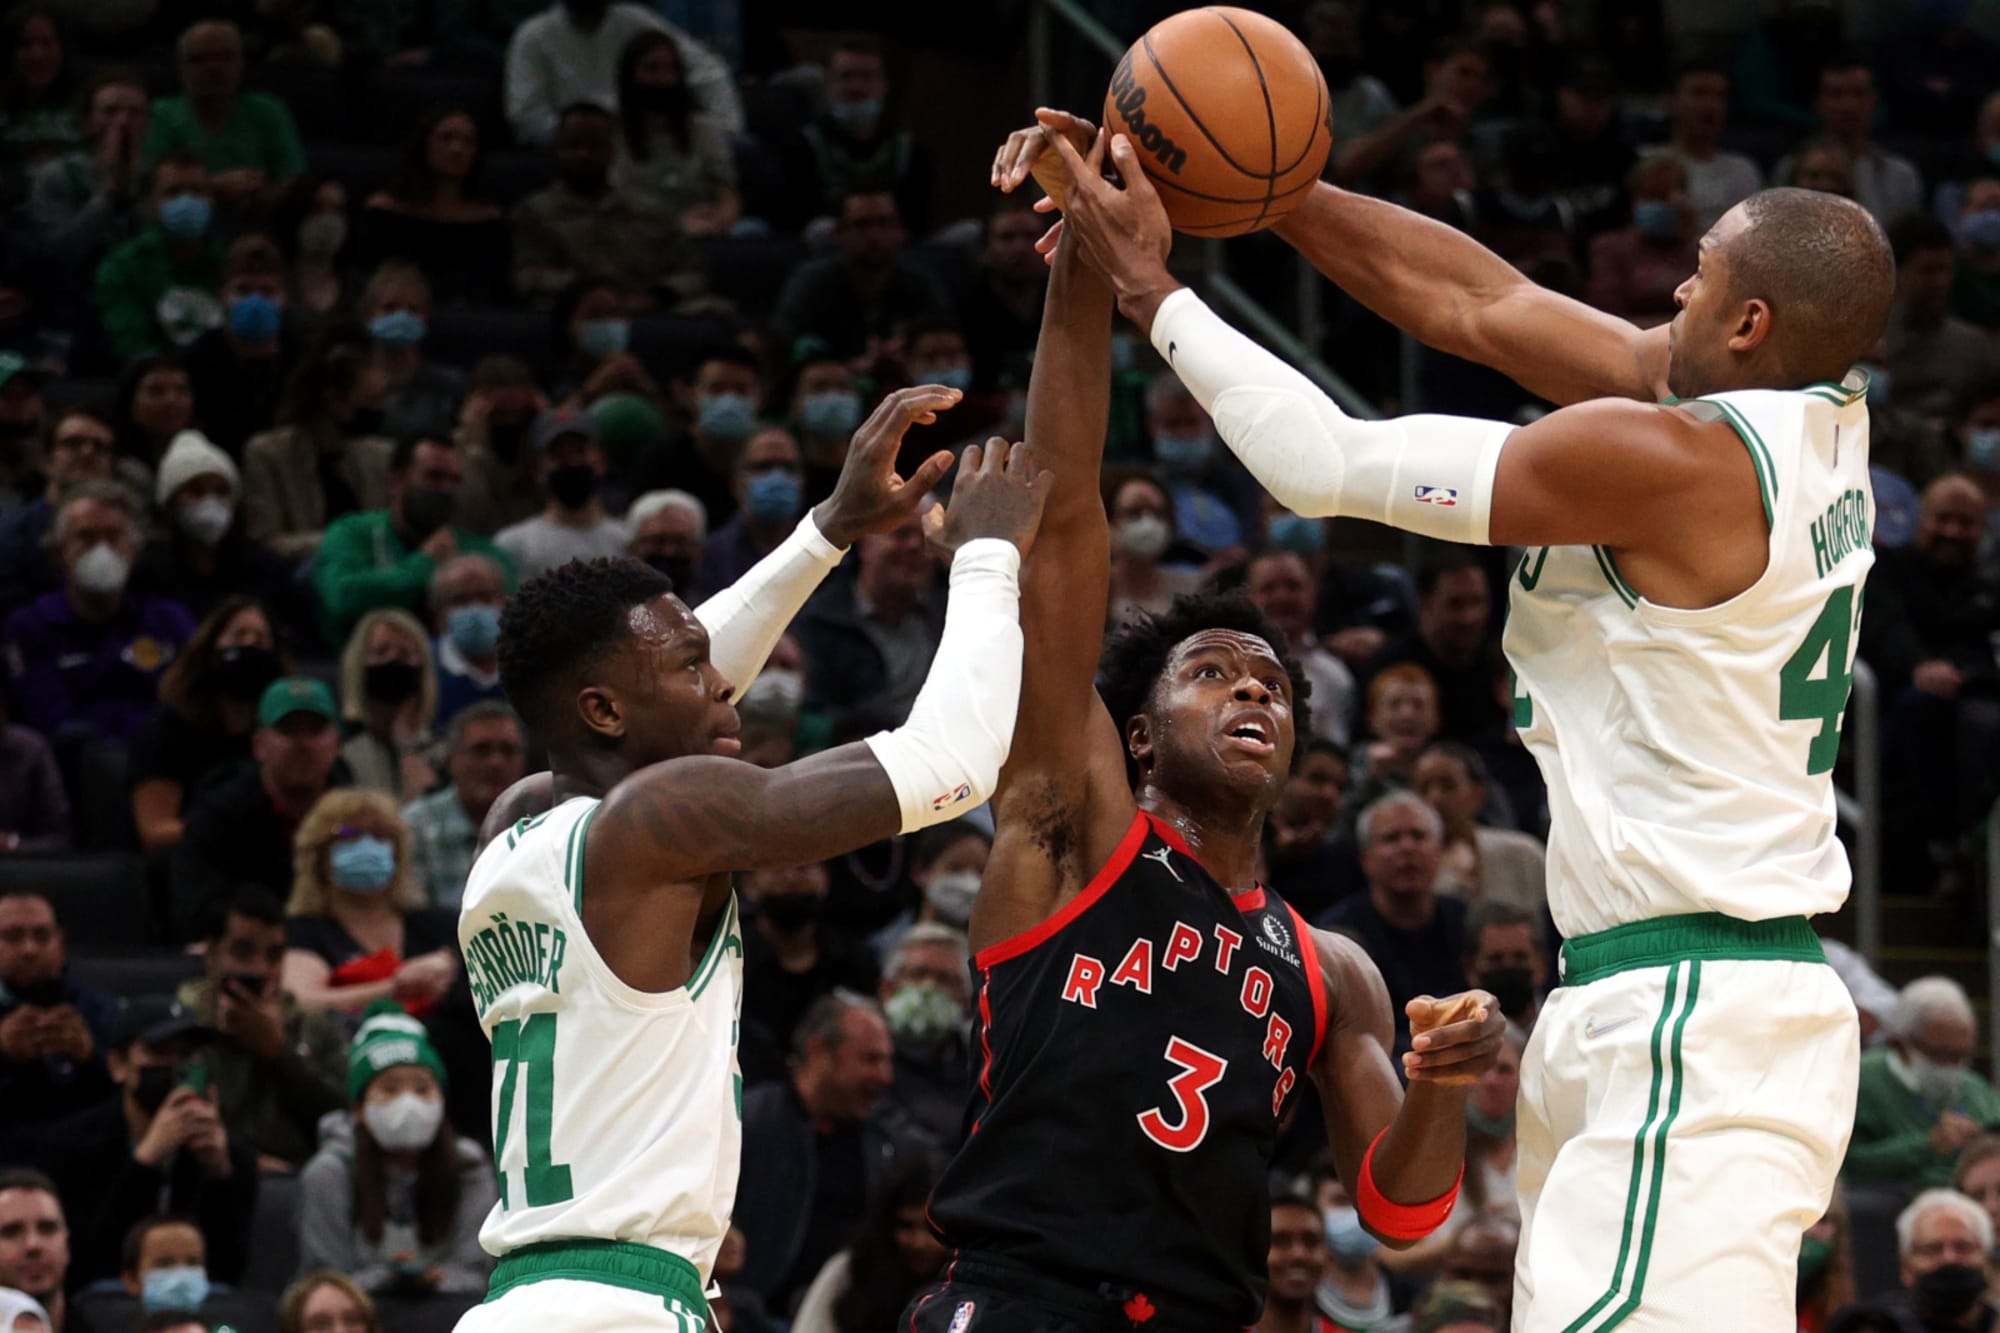 Raptors Winners and Losers from ugly defeat against Celtics